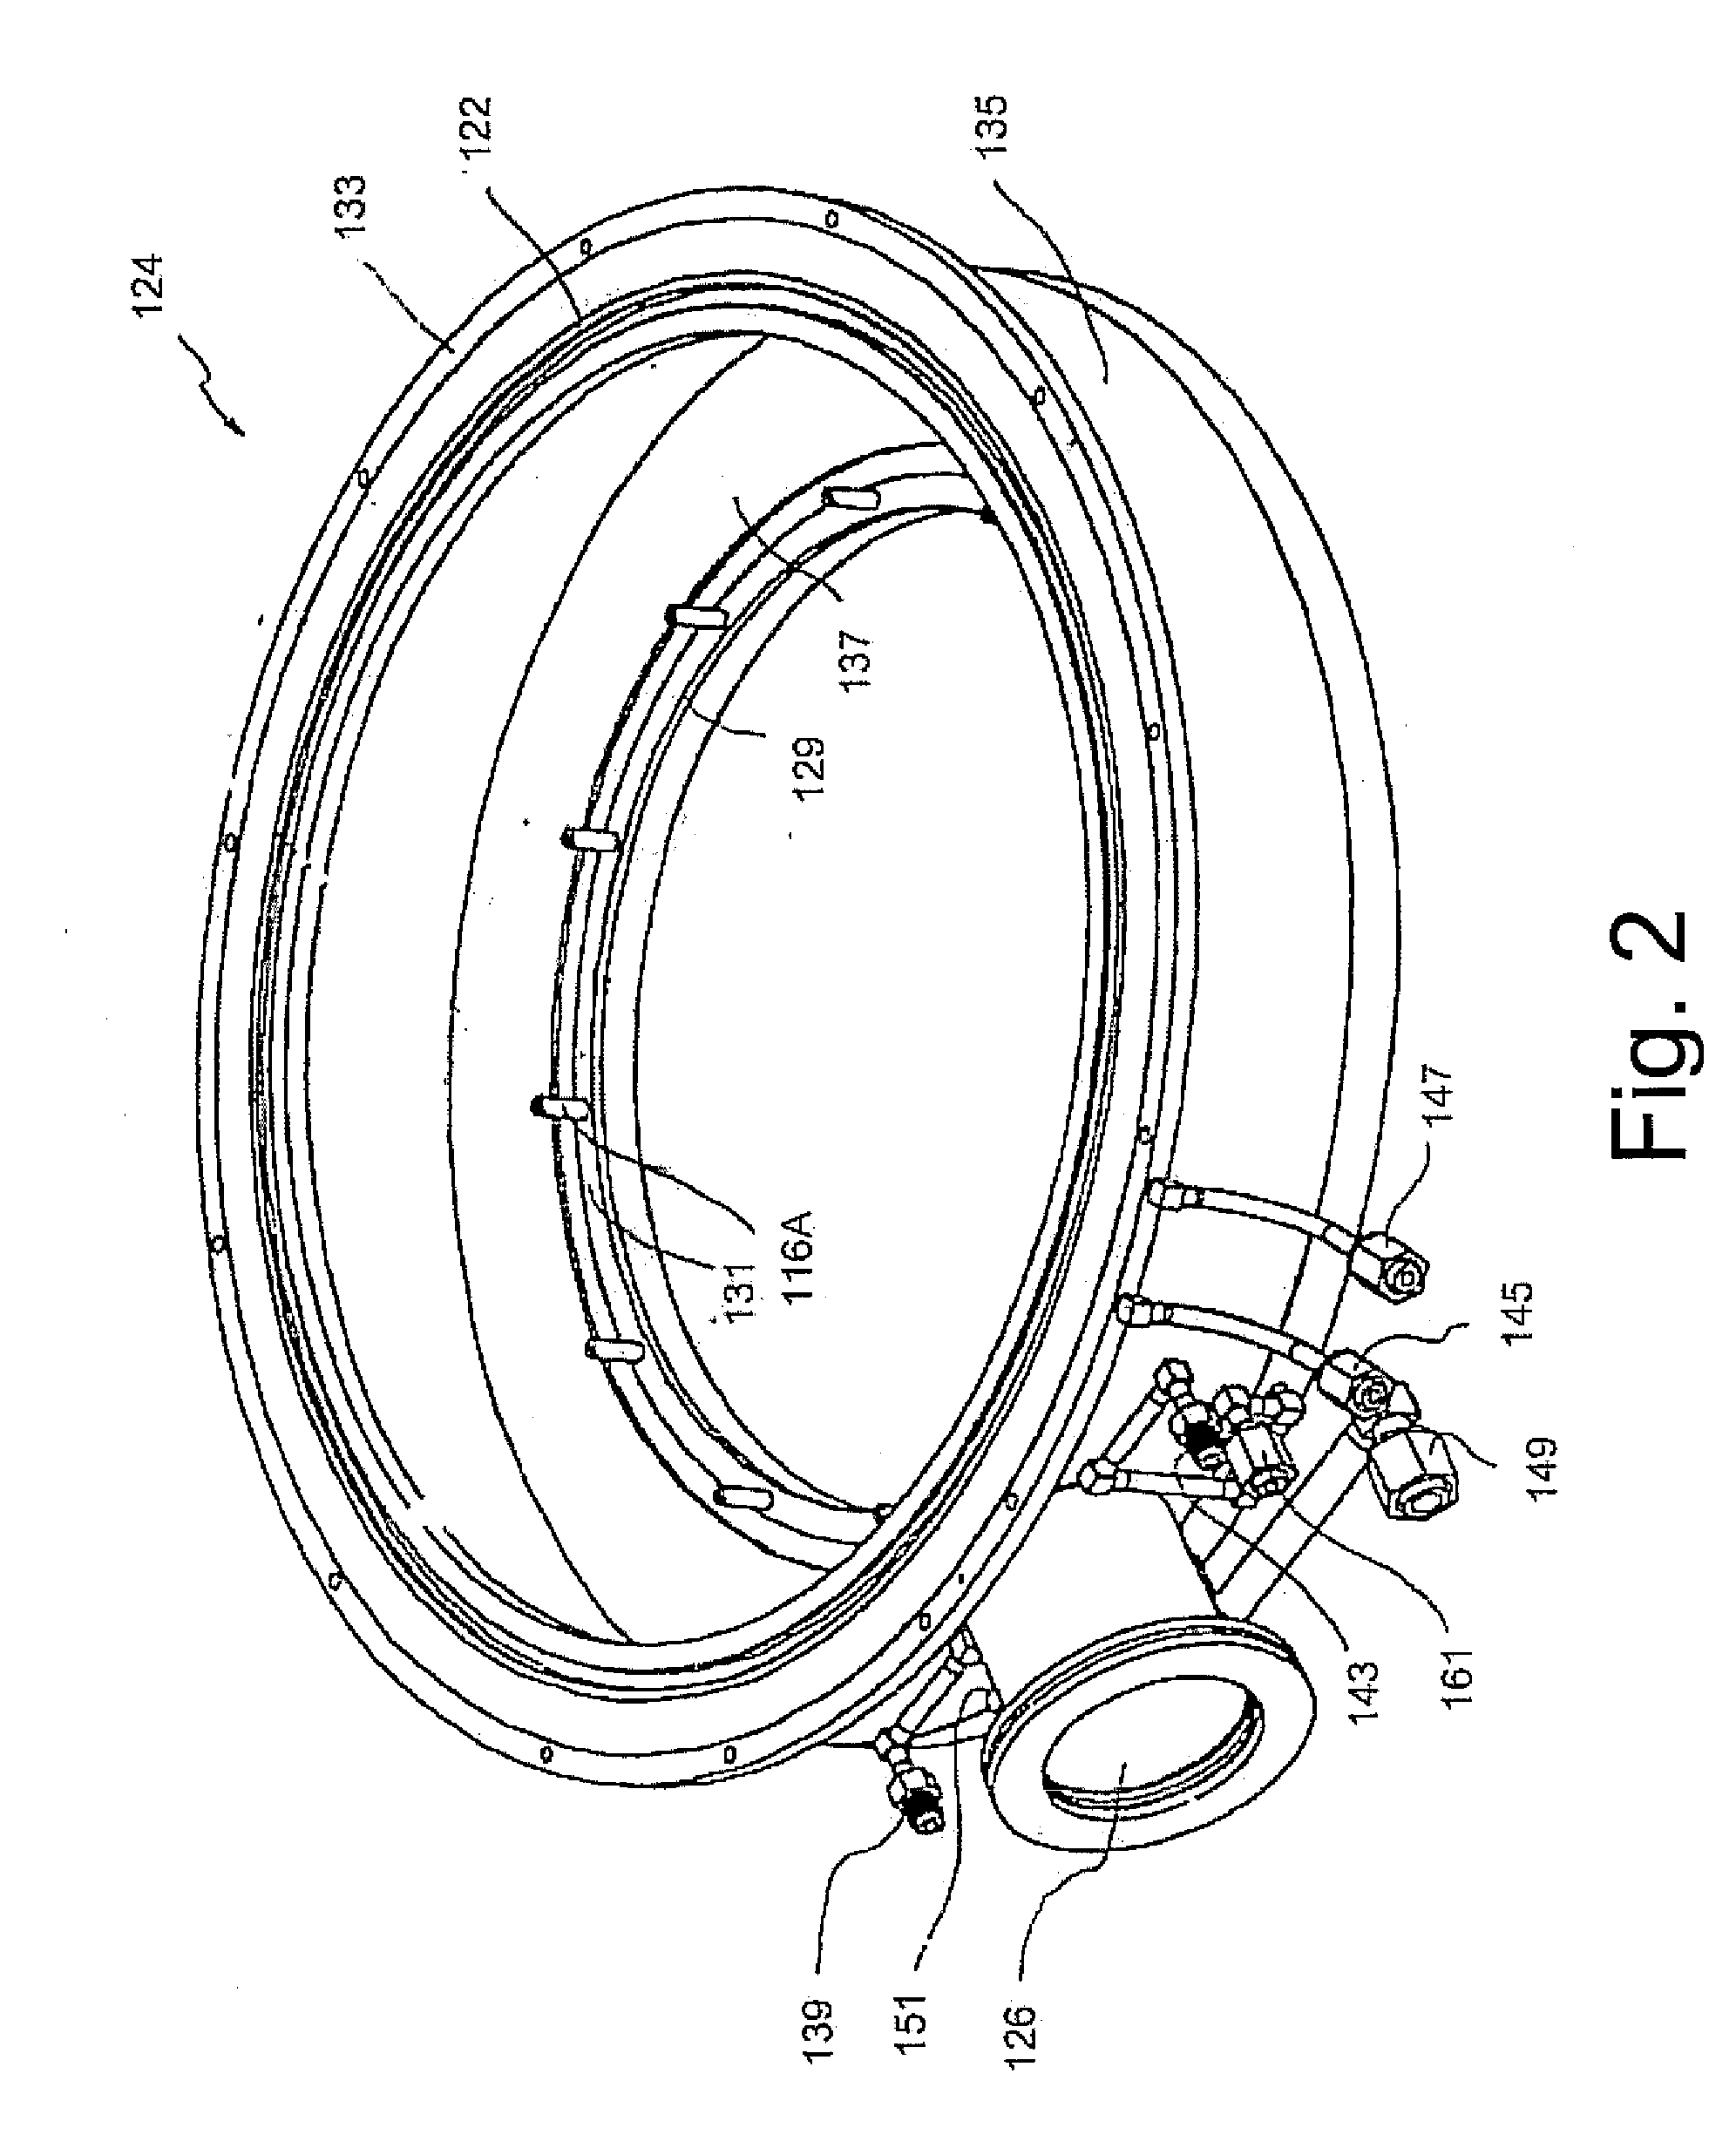 Thermal processing system with across-flow liner